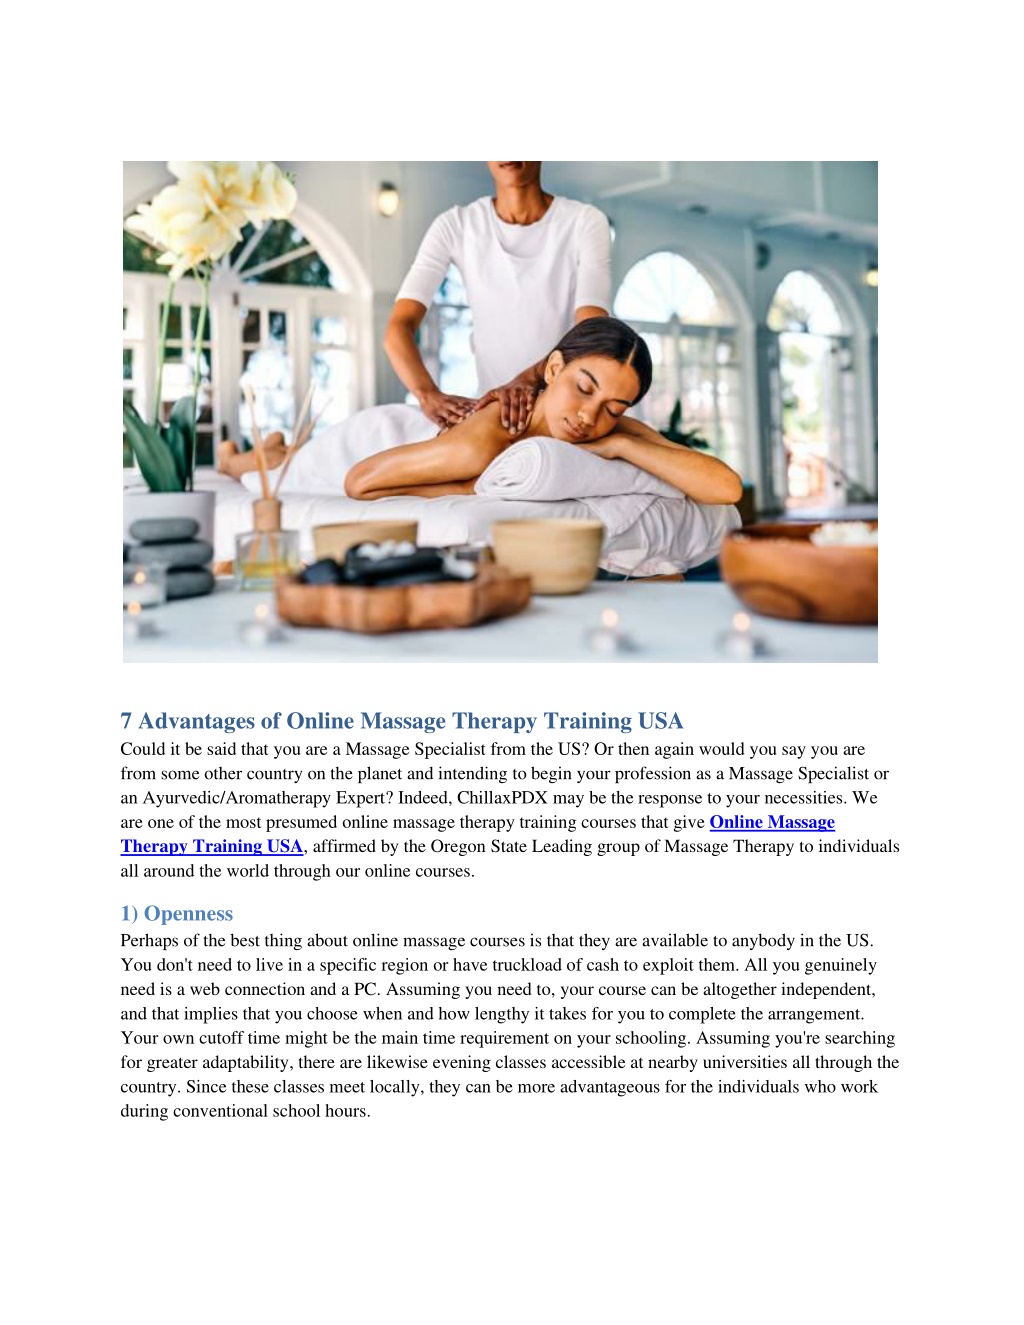 Ppt 7 Benefits Of Online Massage Therapy Training Usa Powerpoint Presentation Id11540113 6821